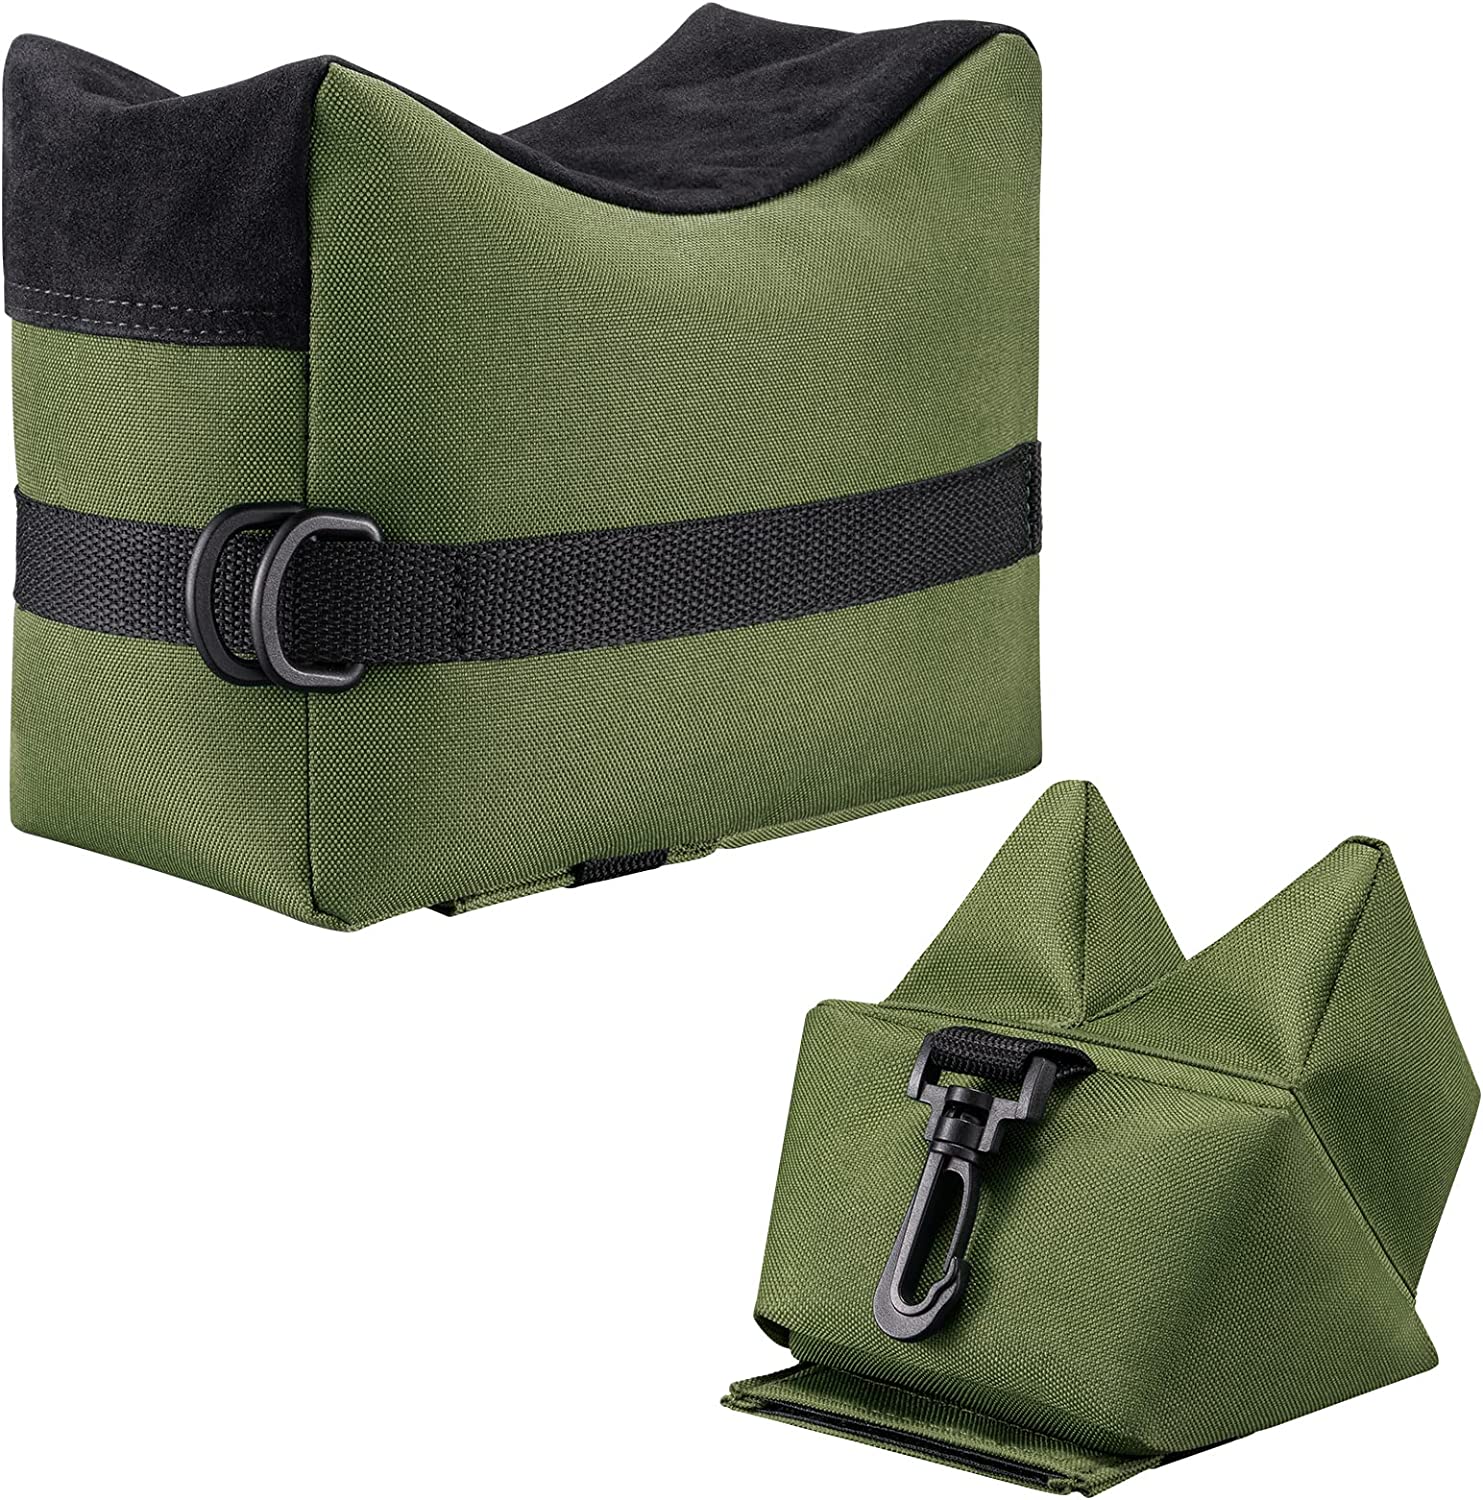 Outdoor Shooting Rest Bags Target Sports Shooting Bench Rest Front & Rear Support SandBag Stand Holders for Gun Rifle Shooting Hunting Photography